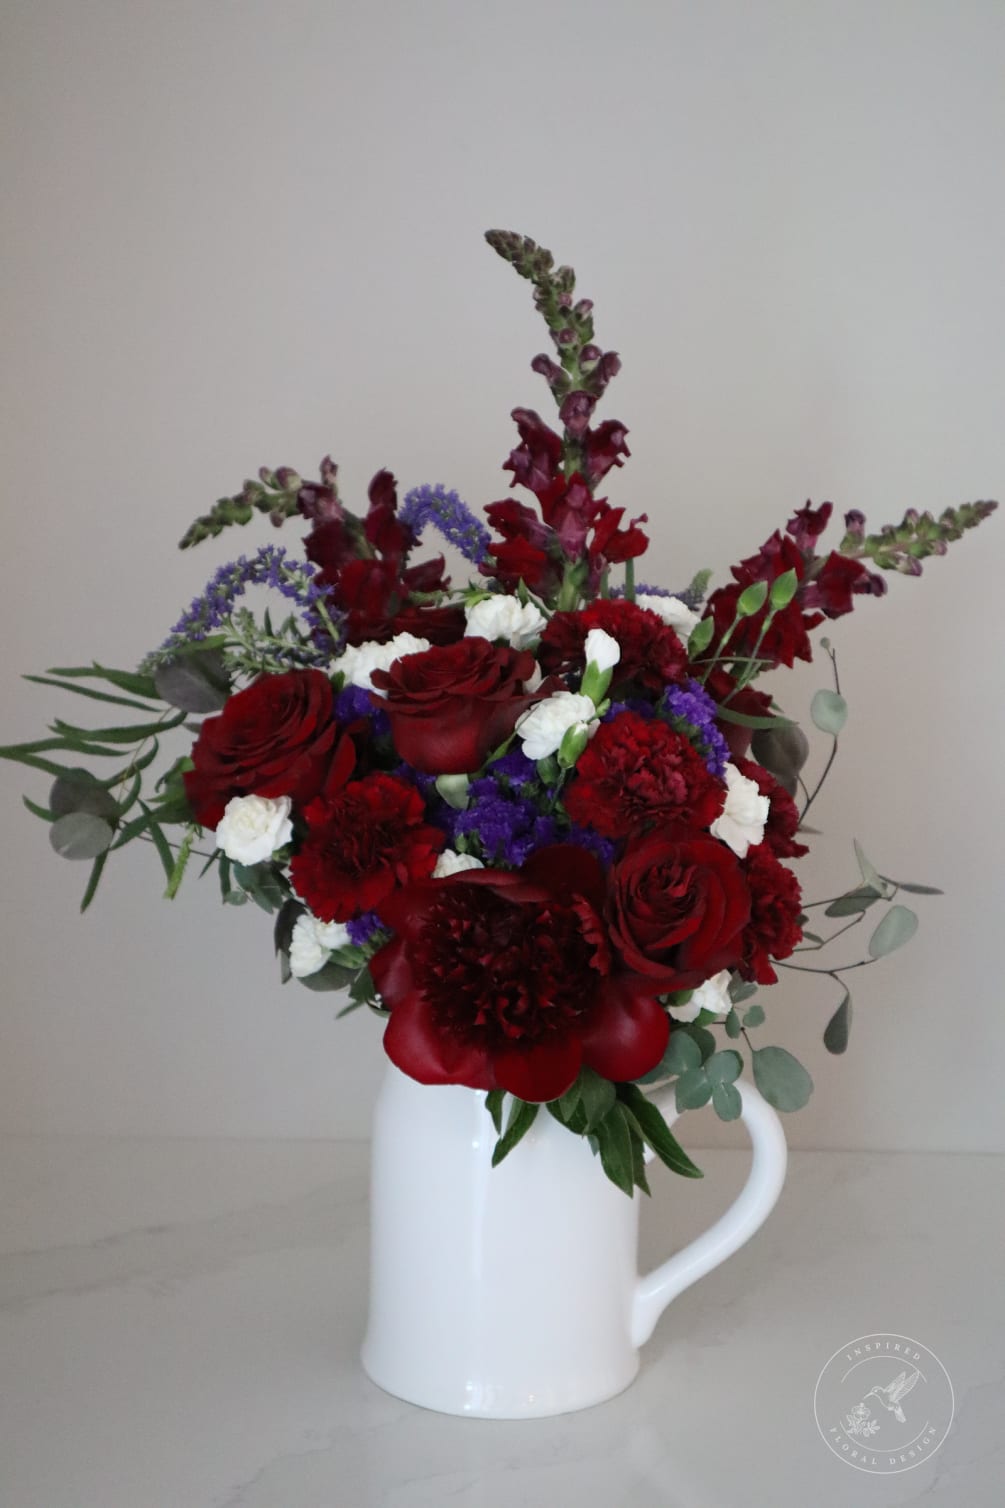 This elegant and regal floral arrangement is incredibly beautiful with deep colors